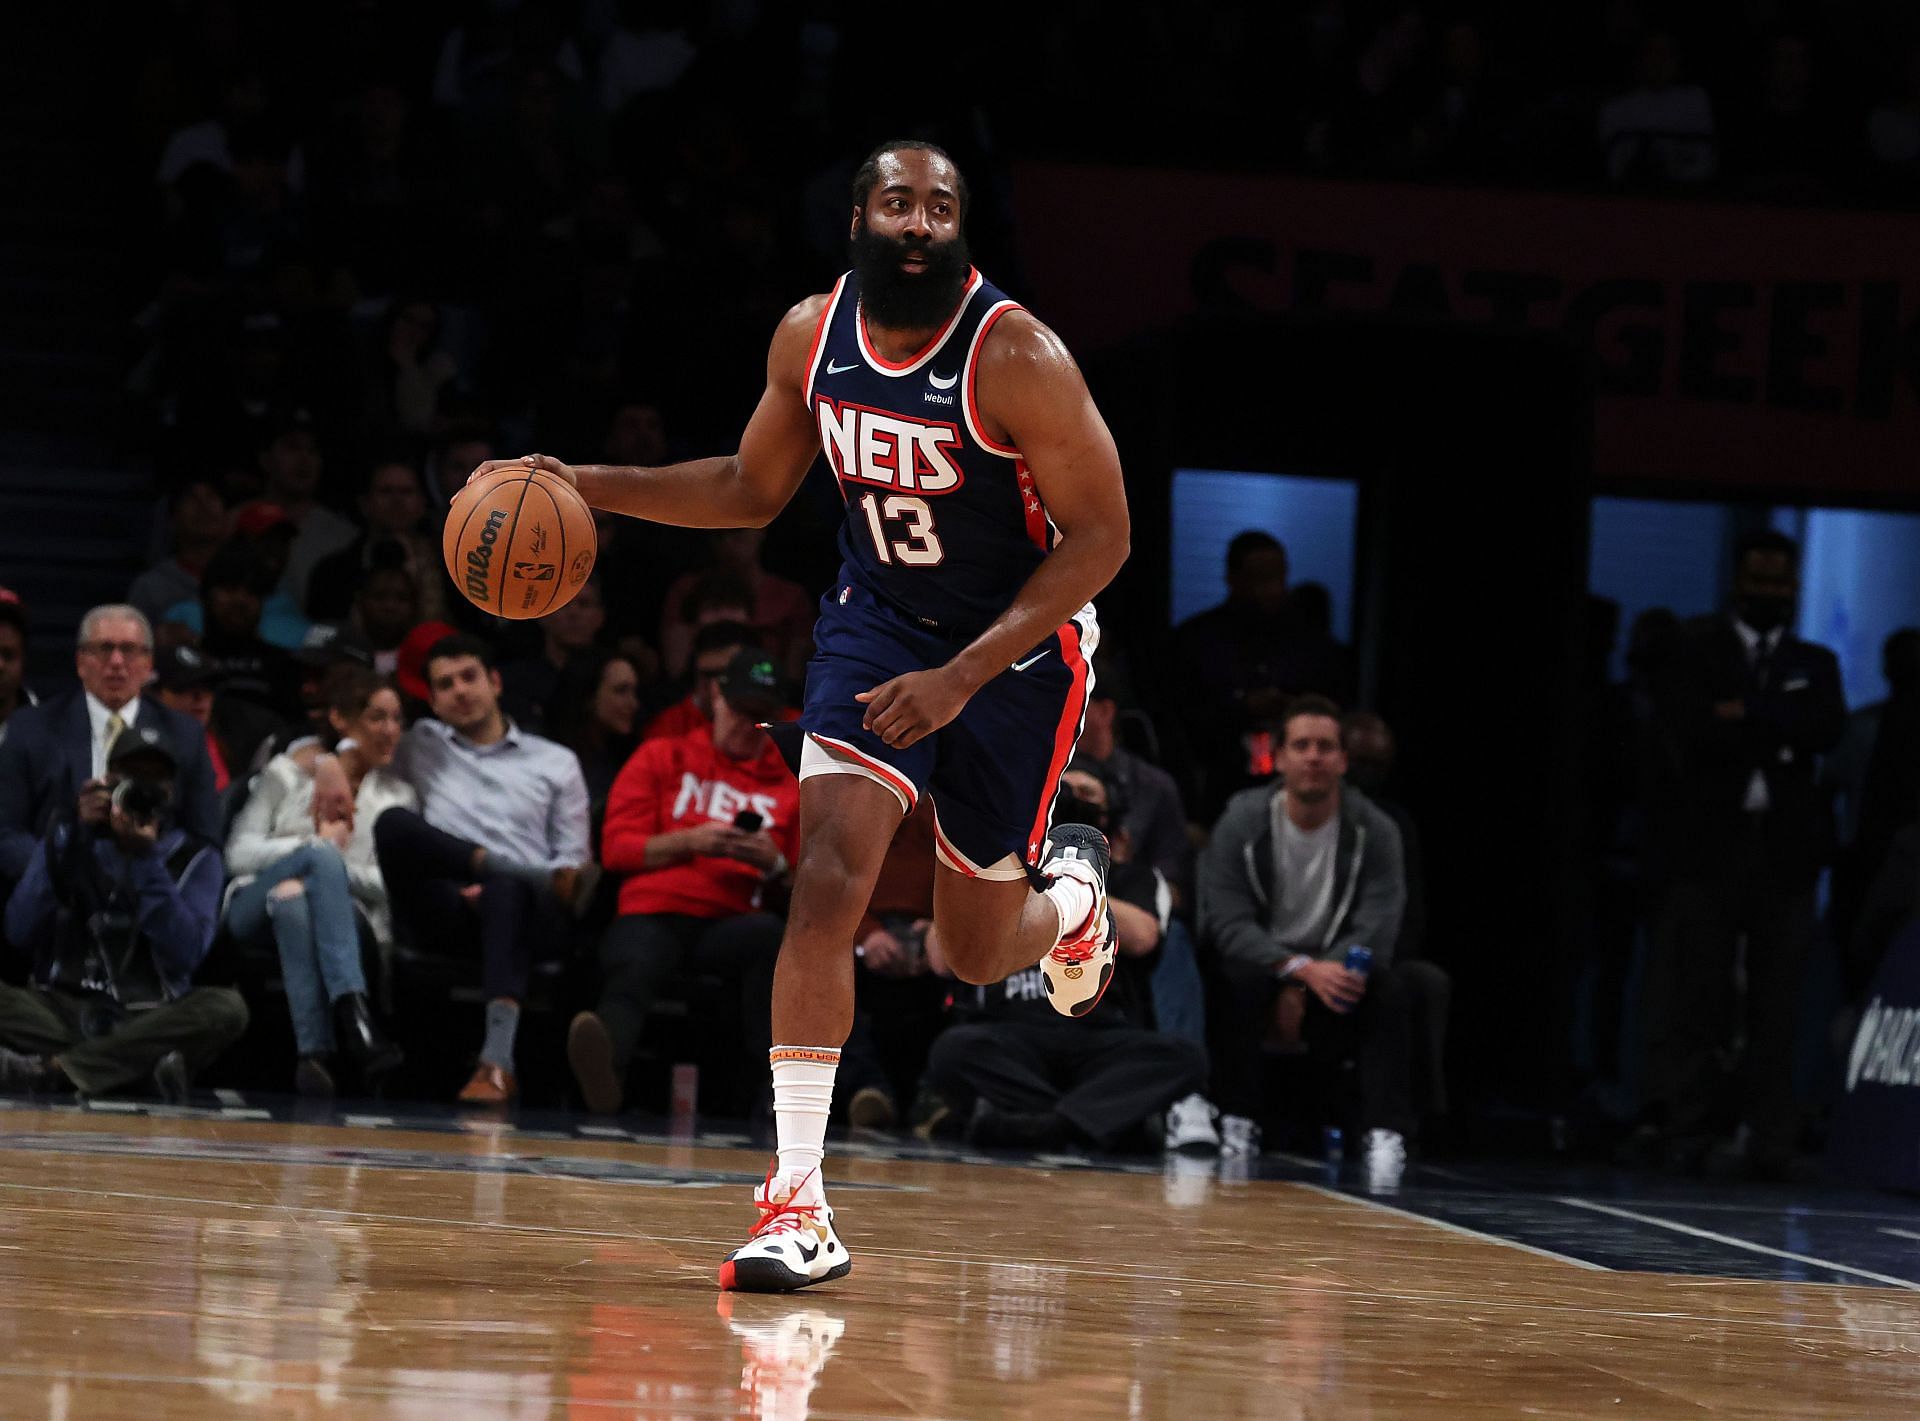 James Harden enters the 2500 three-pointers club